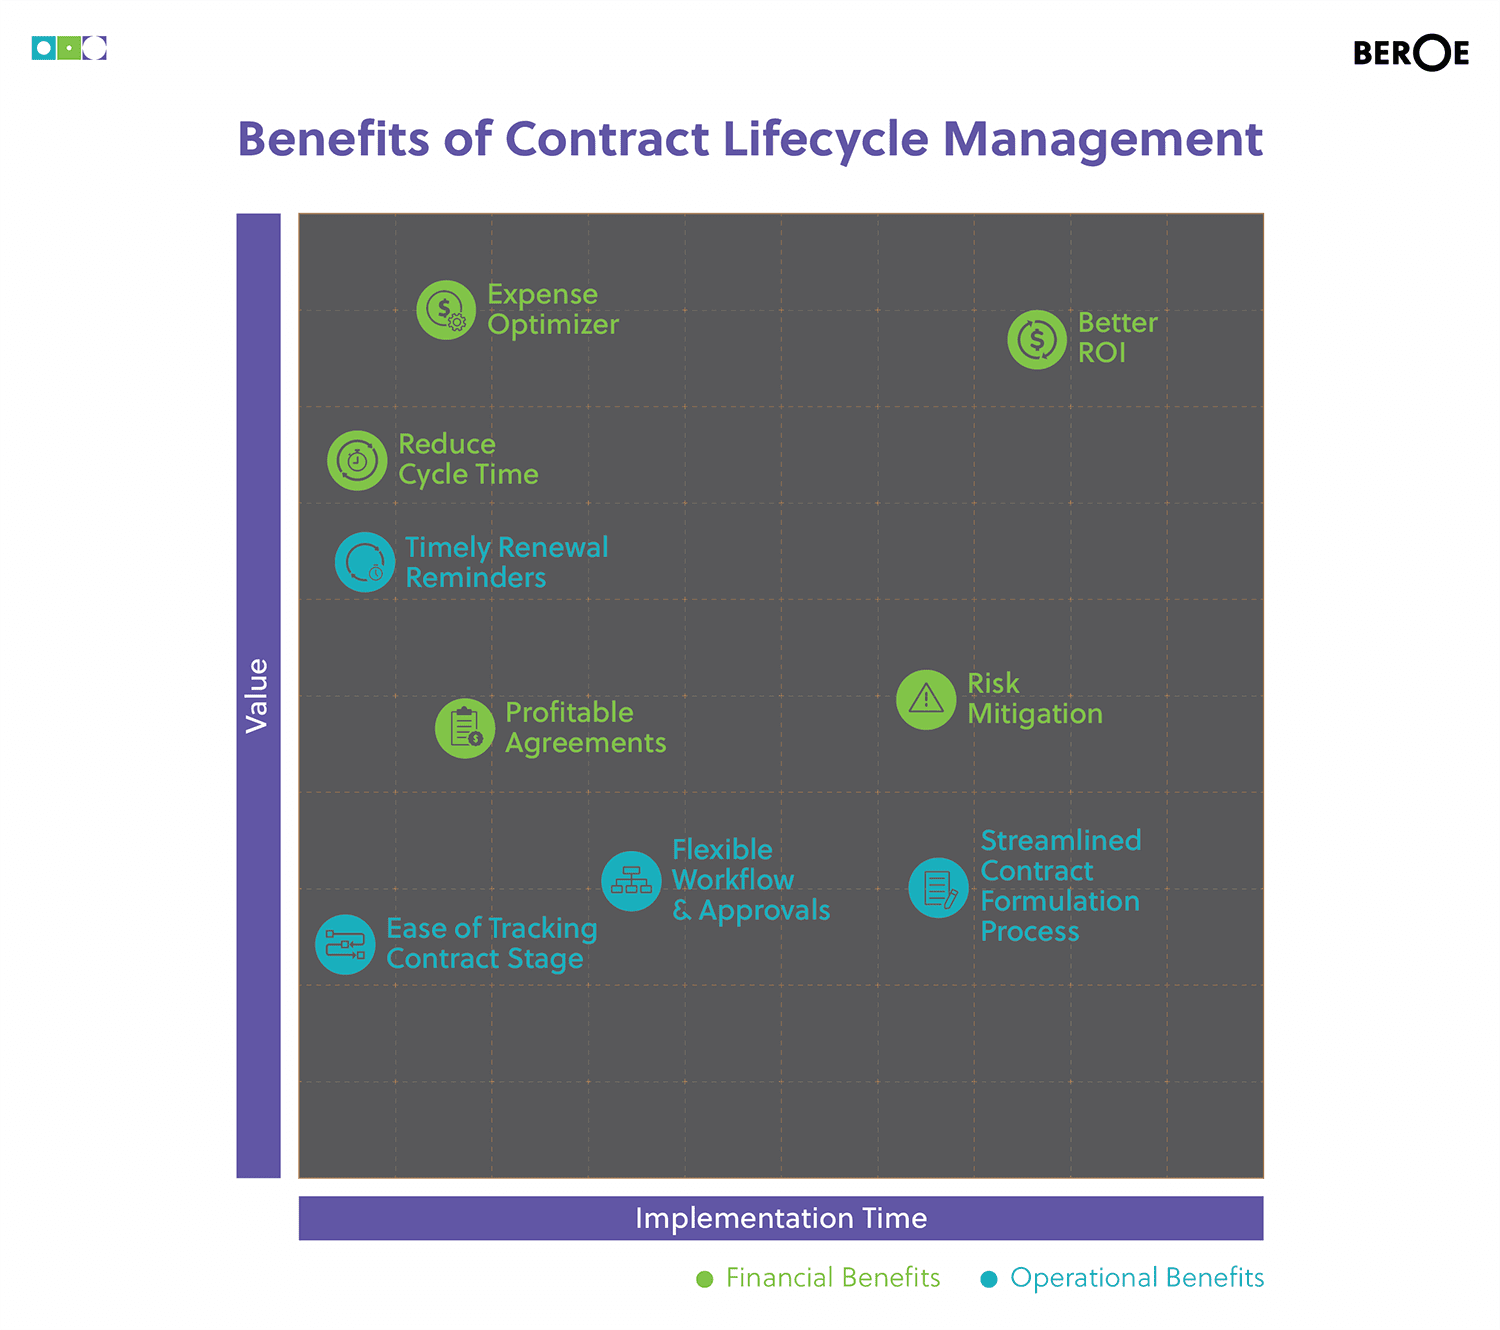 Benefits of Contract Lifecycle Management